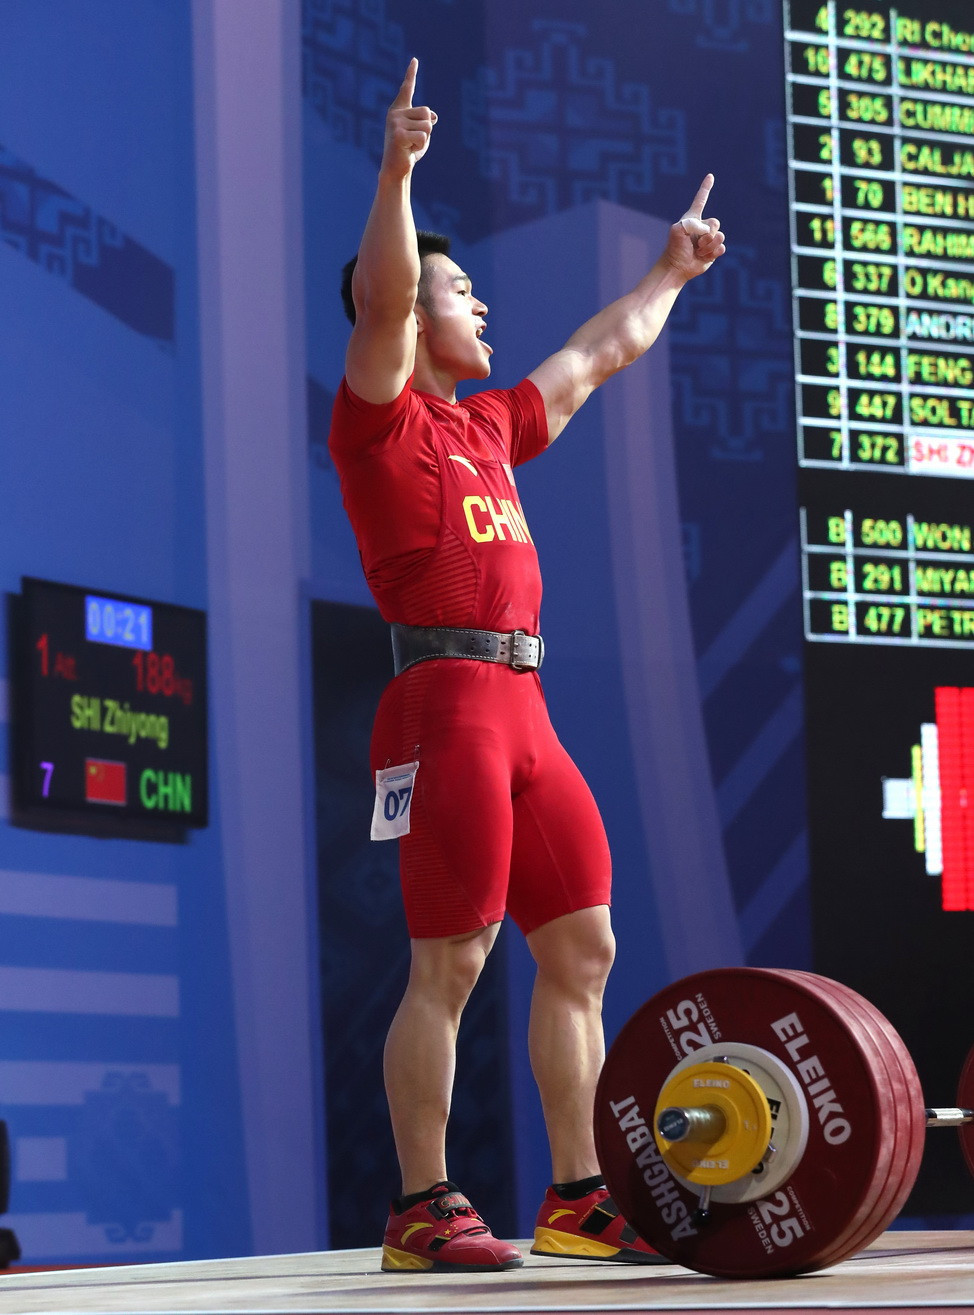 Shi Zhiyong was one of two overall gold medallists for China on day four of the 2018 International Weightlifting Federation (IWF) World Championships, setting three world standards to win the men's 73 kilograms title ©IWF